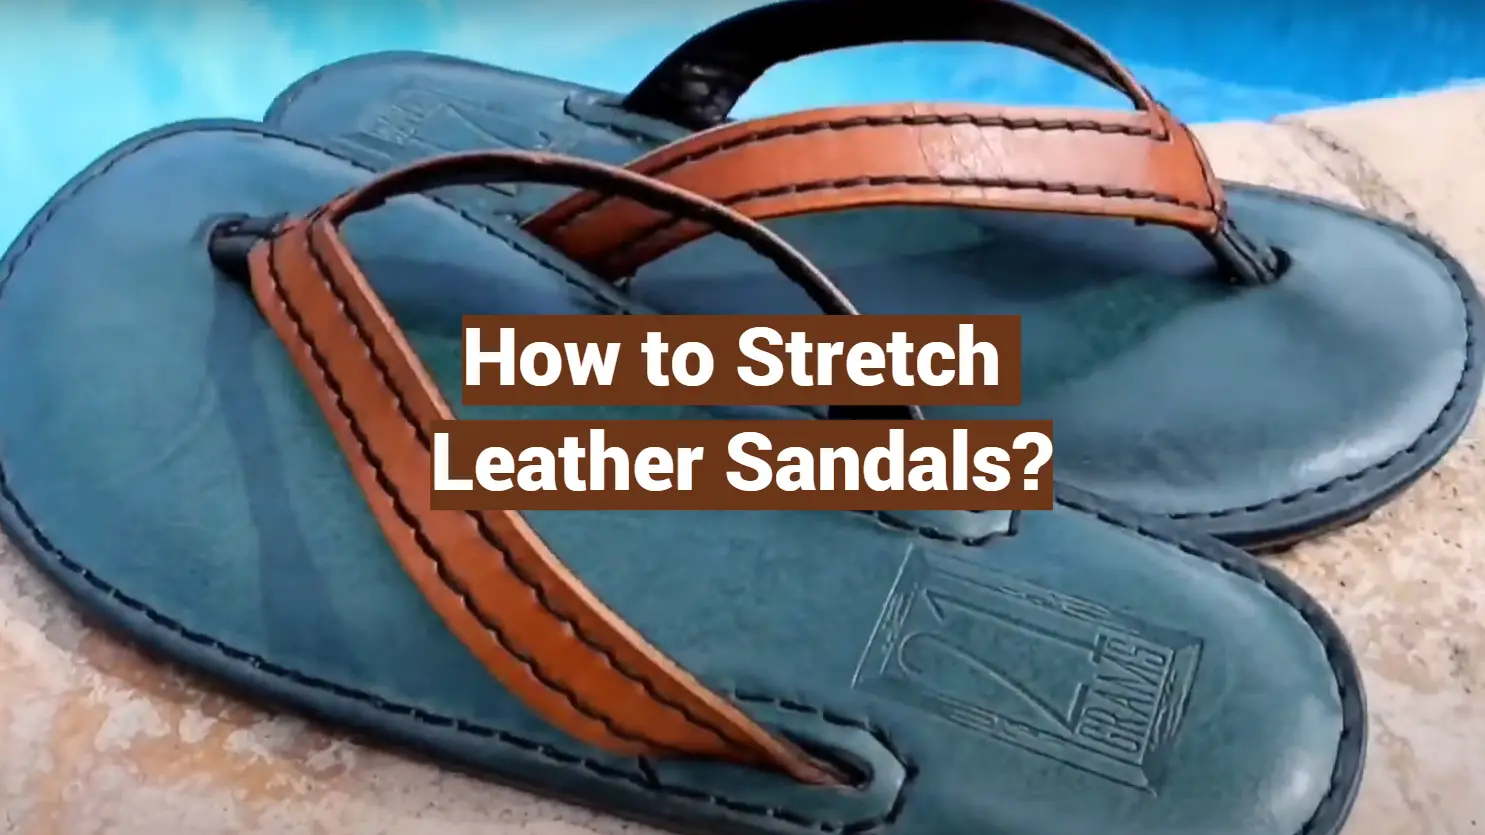 How to Stretch Leather Sandals?